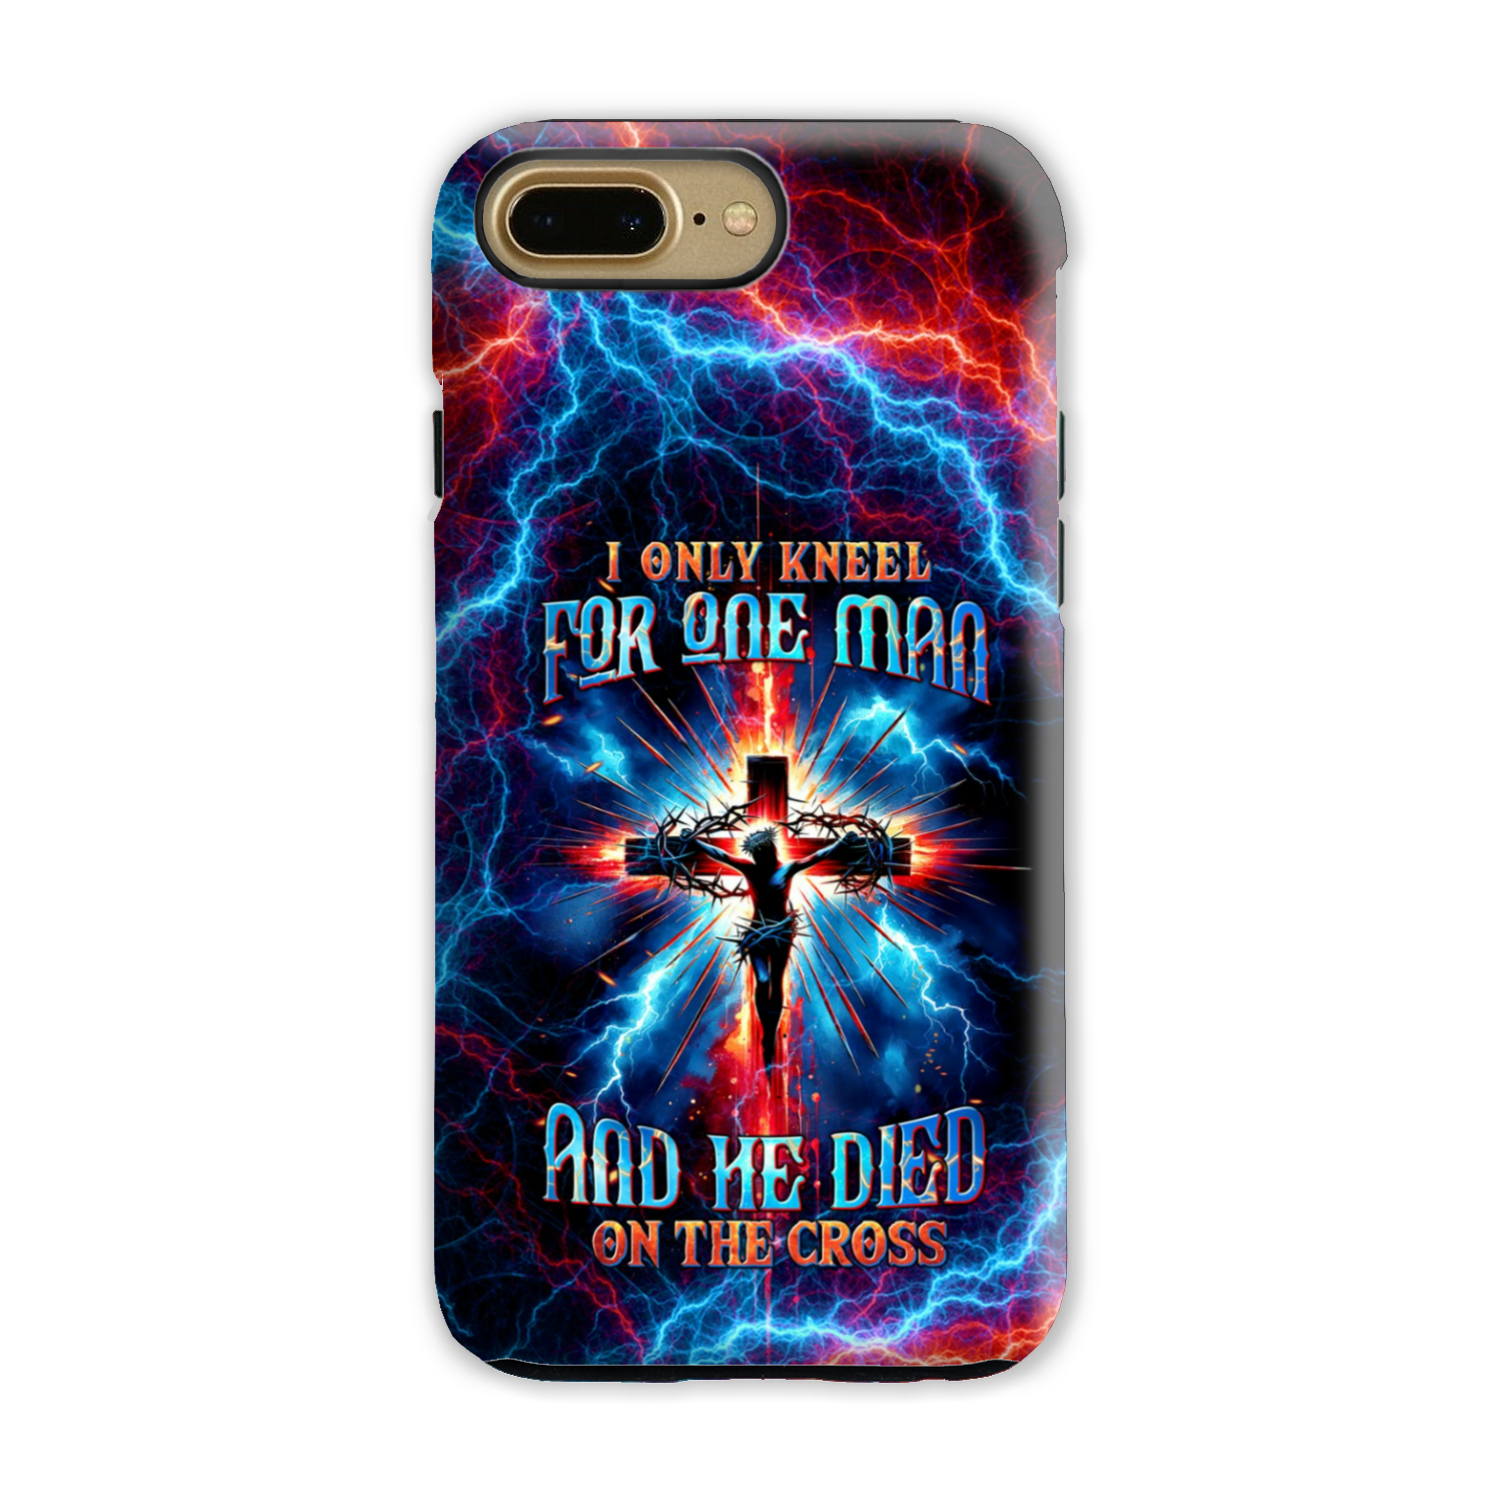 I Only Kneel For One Man Phone Case - Tltw0204241